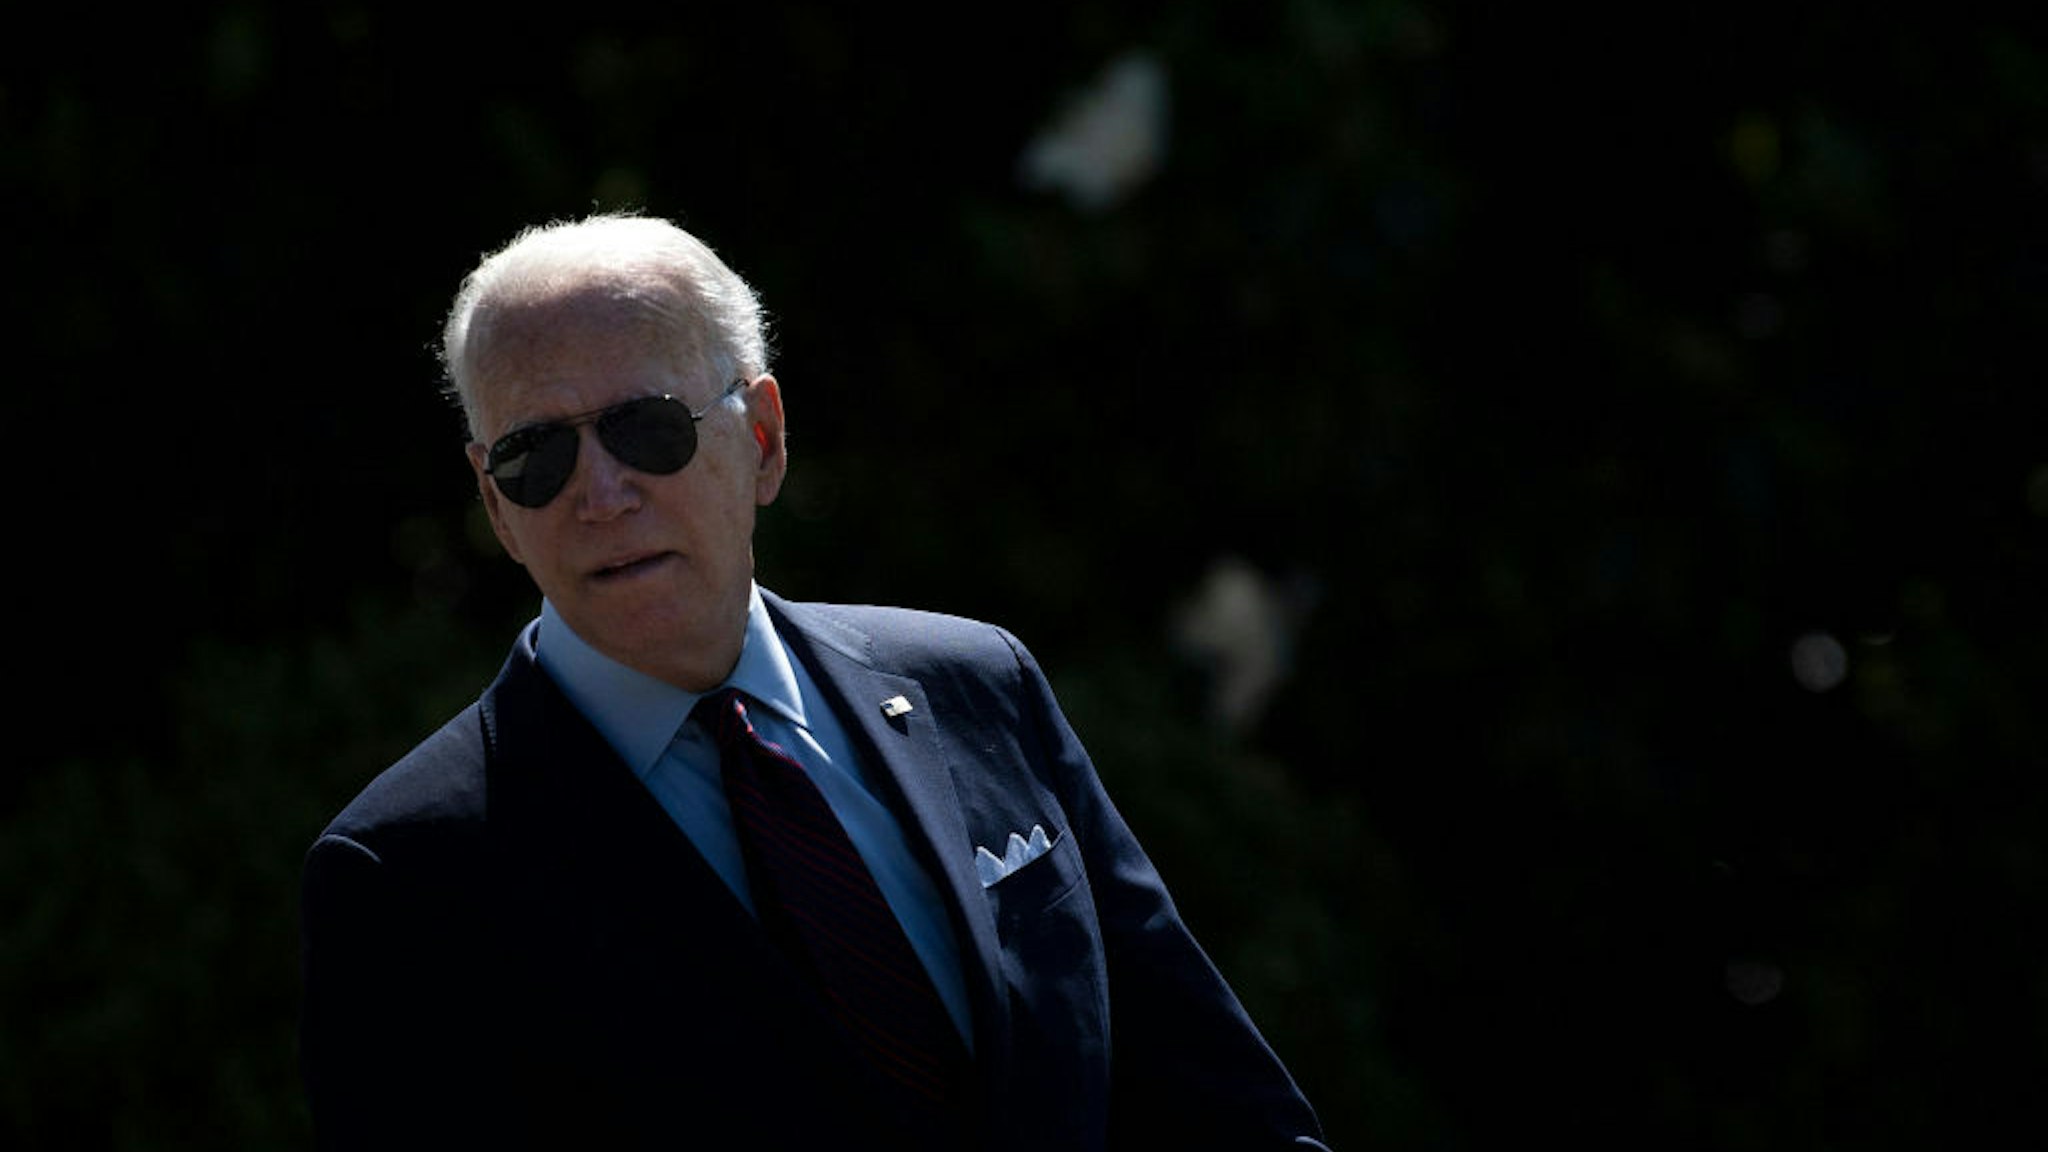 US President Joe Biden walks to Marine One on the South Lawn of the White House on June 29, 2021, in Washington, DC en route to an event in Wisconsin. (Photo by Brendan Smialowski / AFP) (Photo by BRENDAN SMIALOWSKI/AFP via Getty Images)